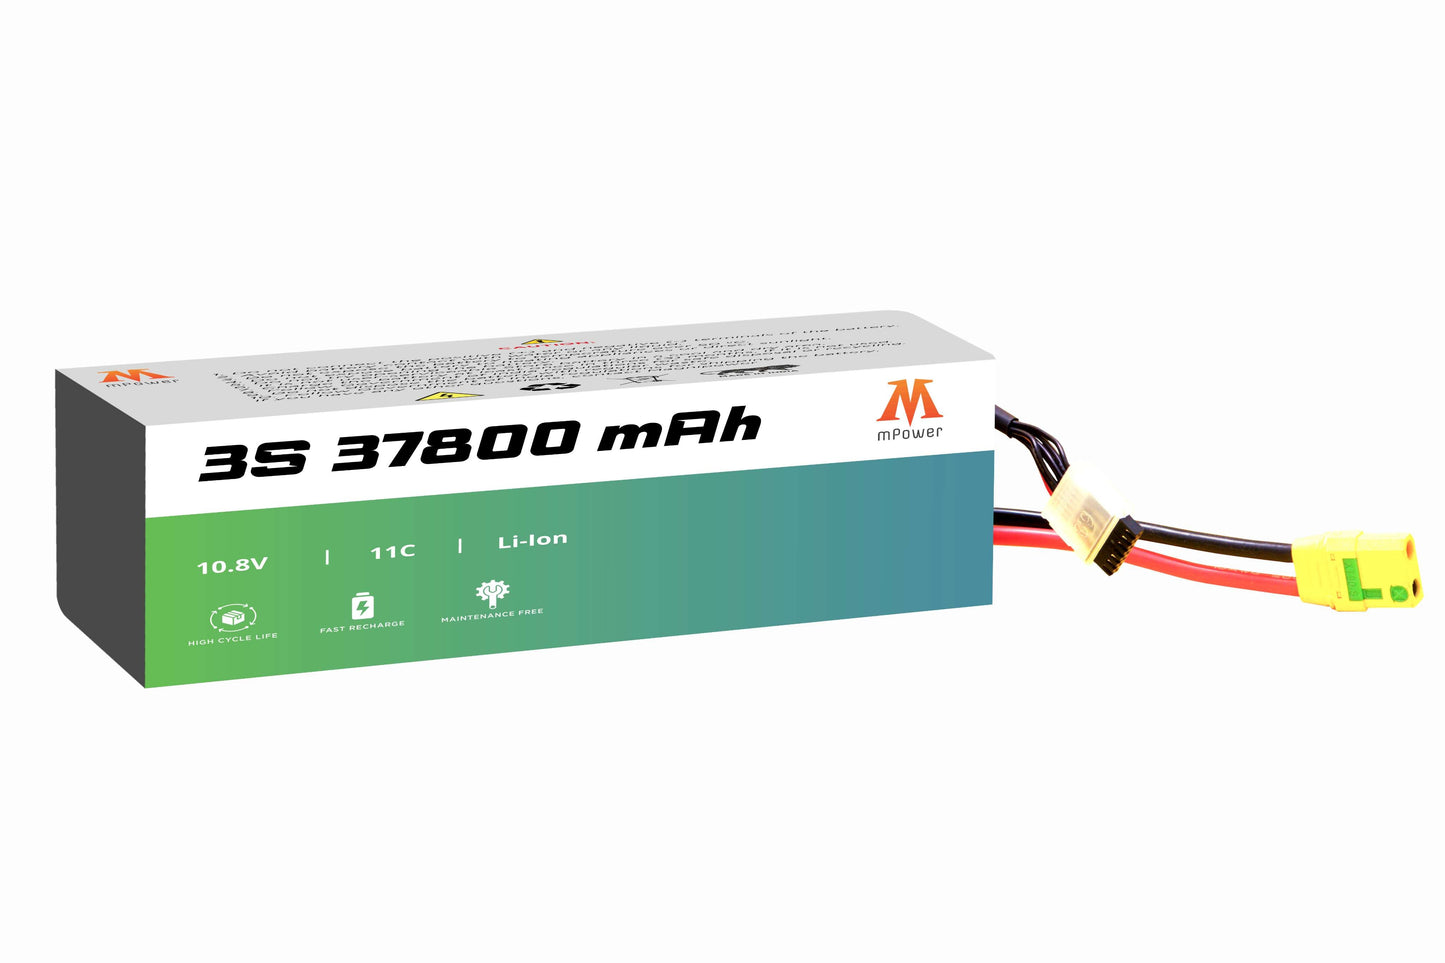 mPower 3S 37800mAh Lithium-Ion Battery for Surveillance Drones